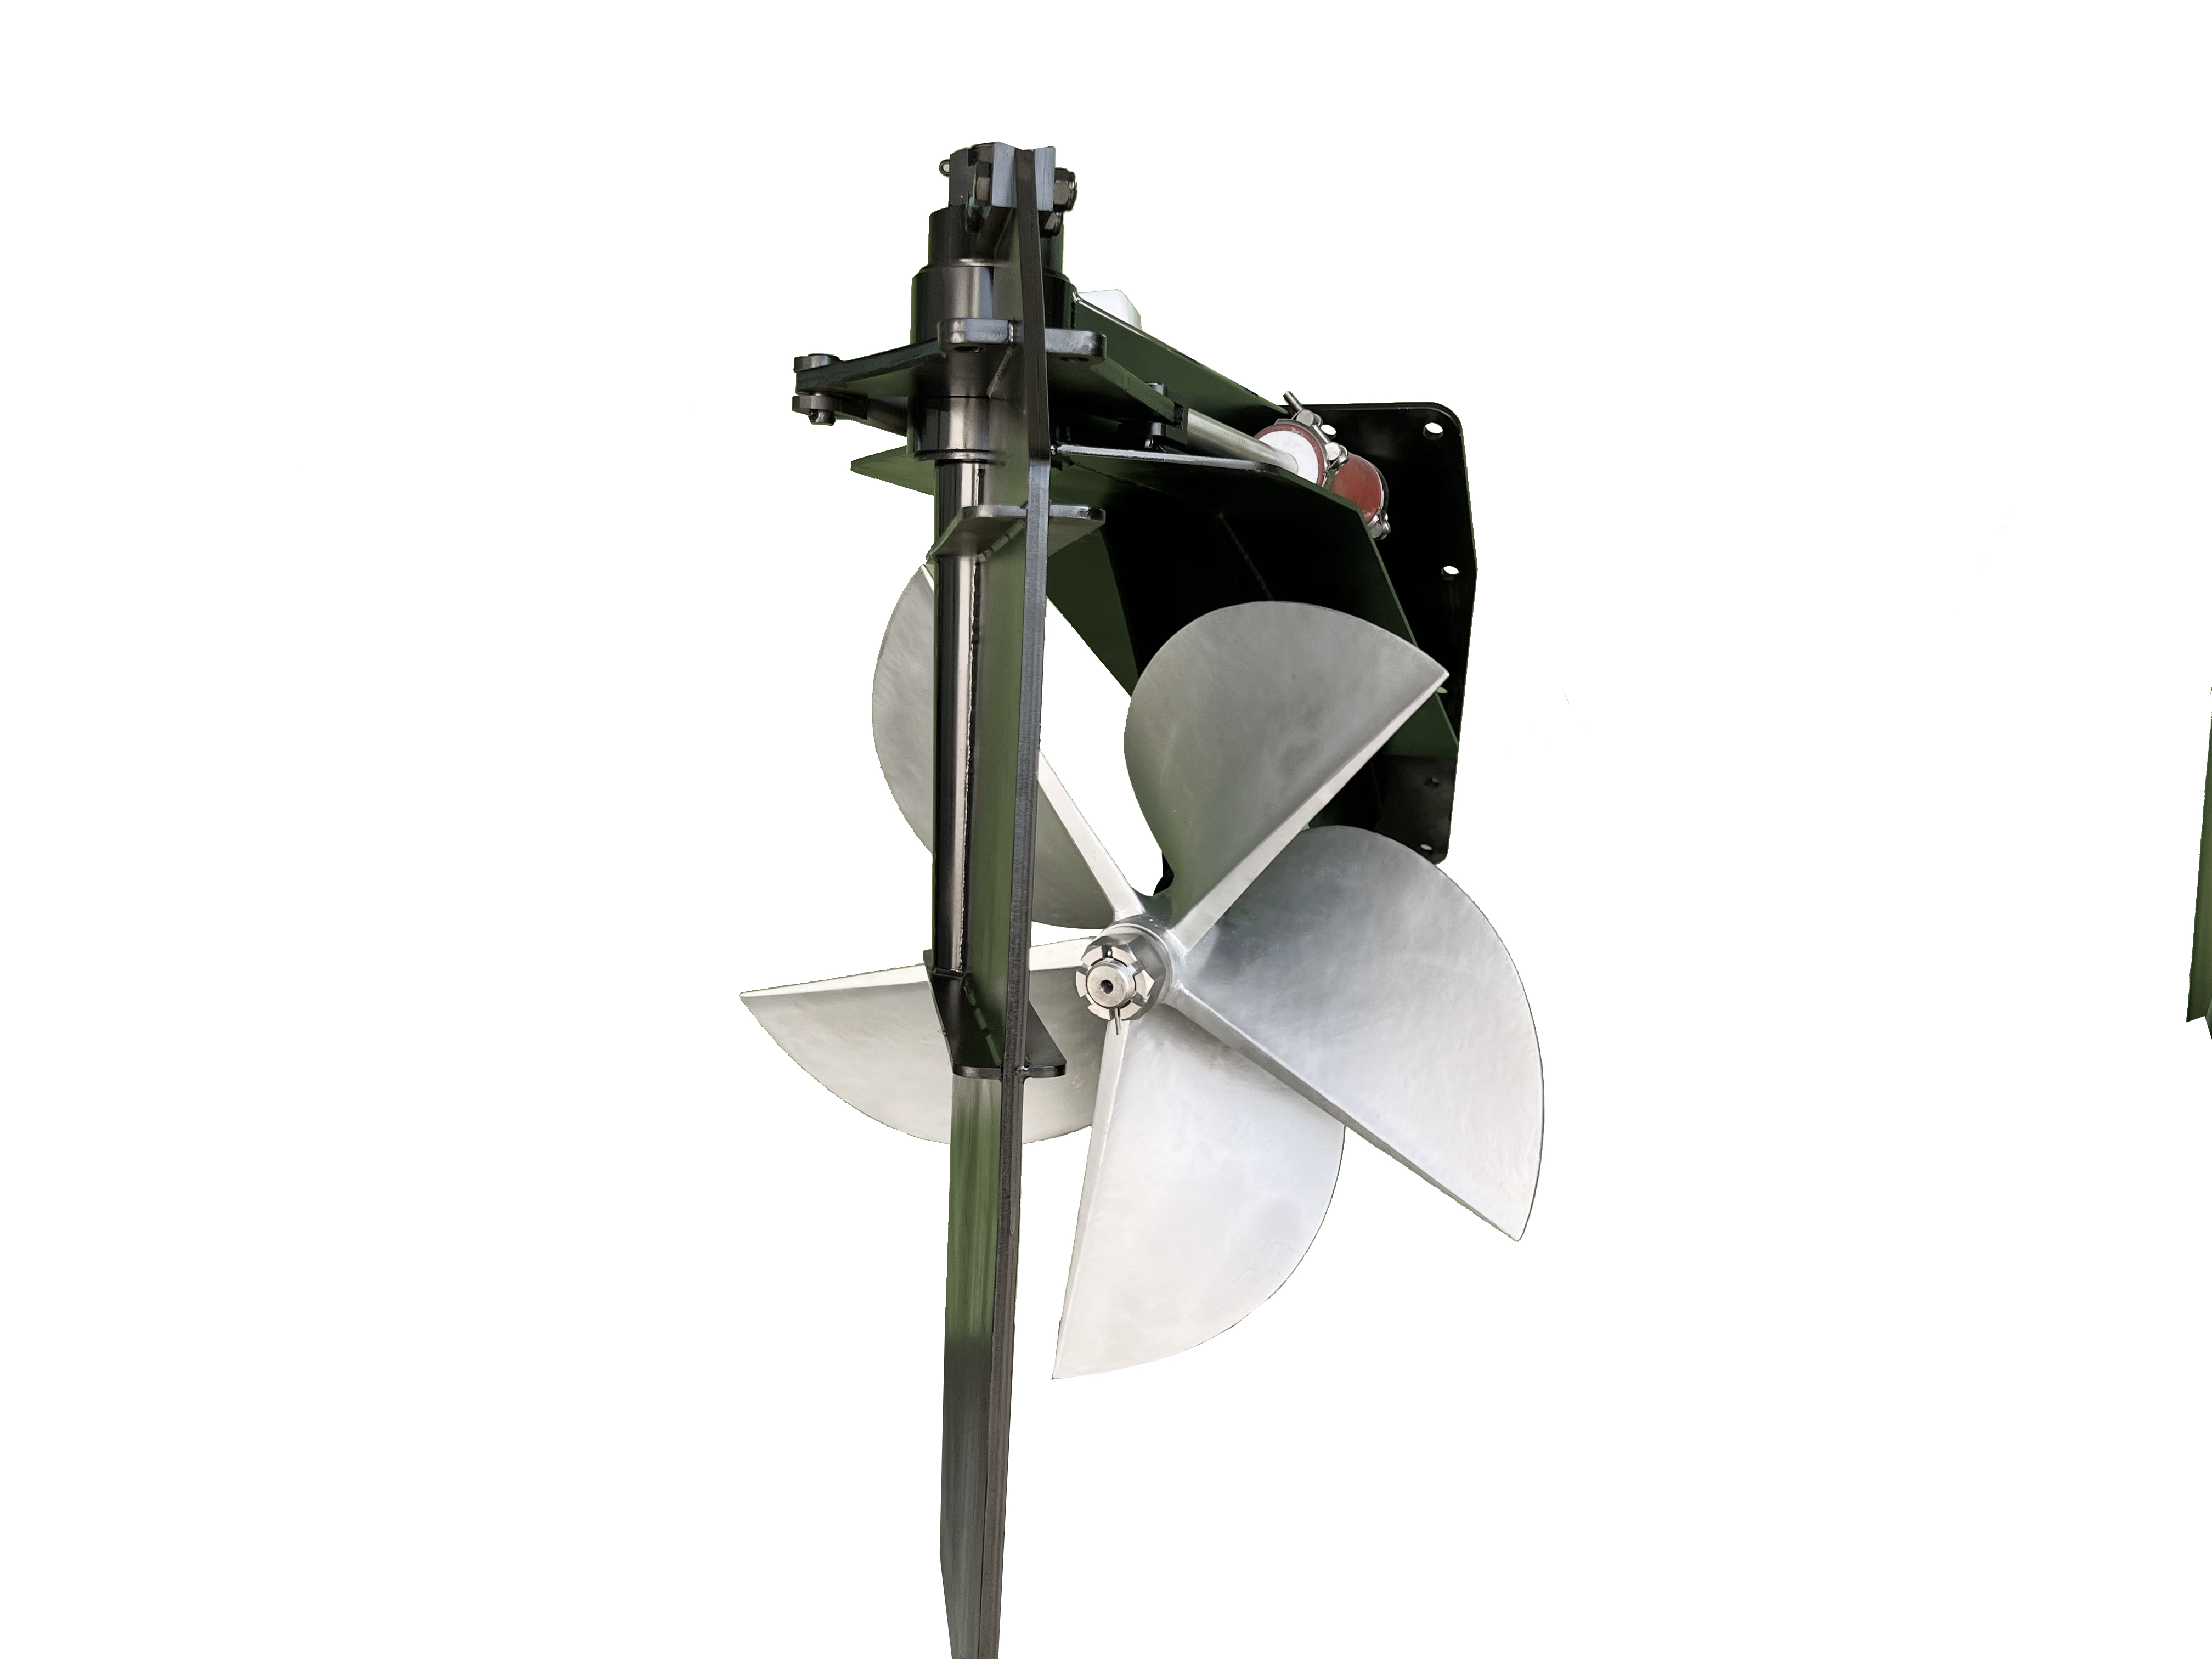 BG550 TSD Ship Propeller System With Boat Inboard Diesel Engine in Reasonable Price